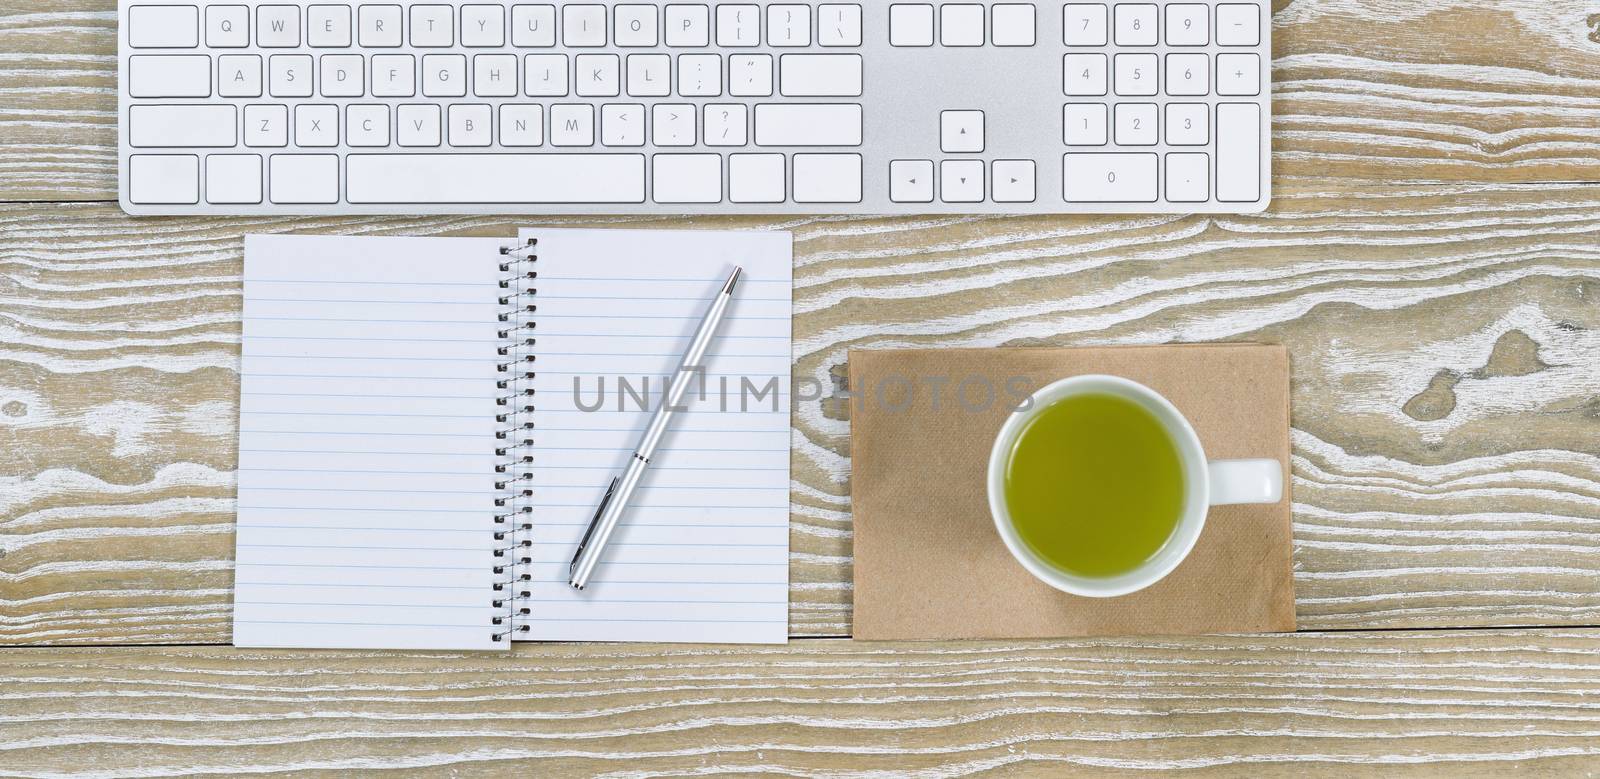 Top view shot of an old white desktop with keyboard, green tea in cup, notepad and pen in horizontal format.